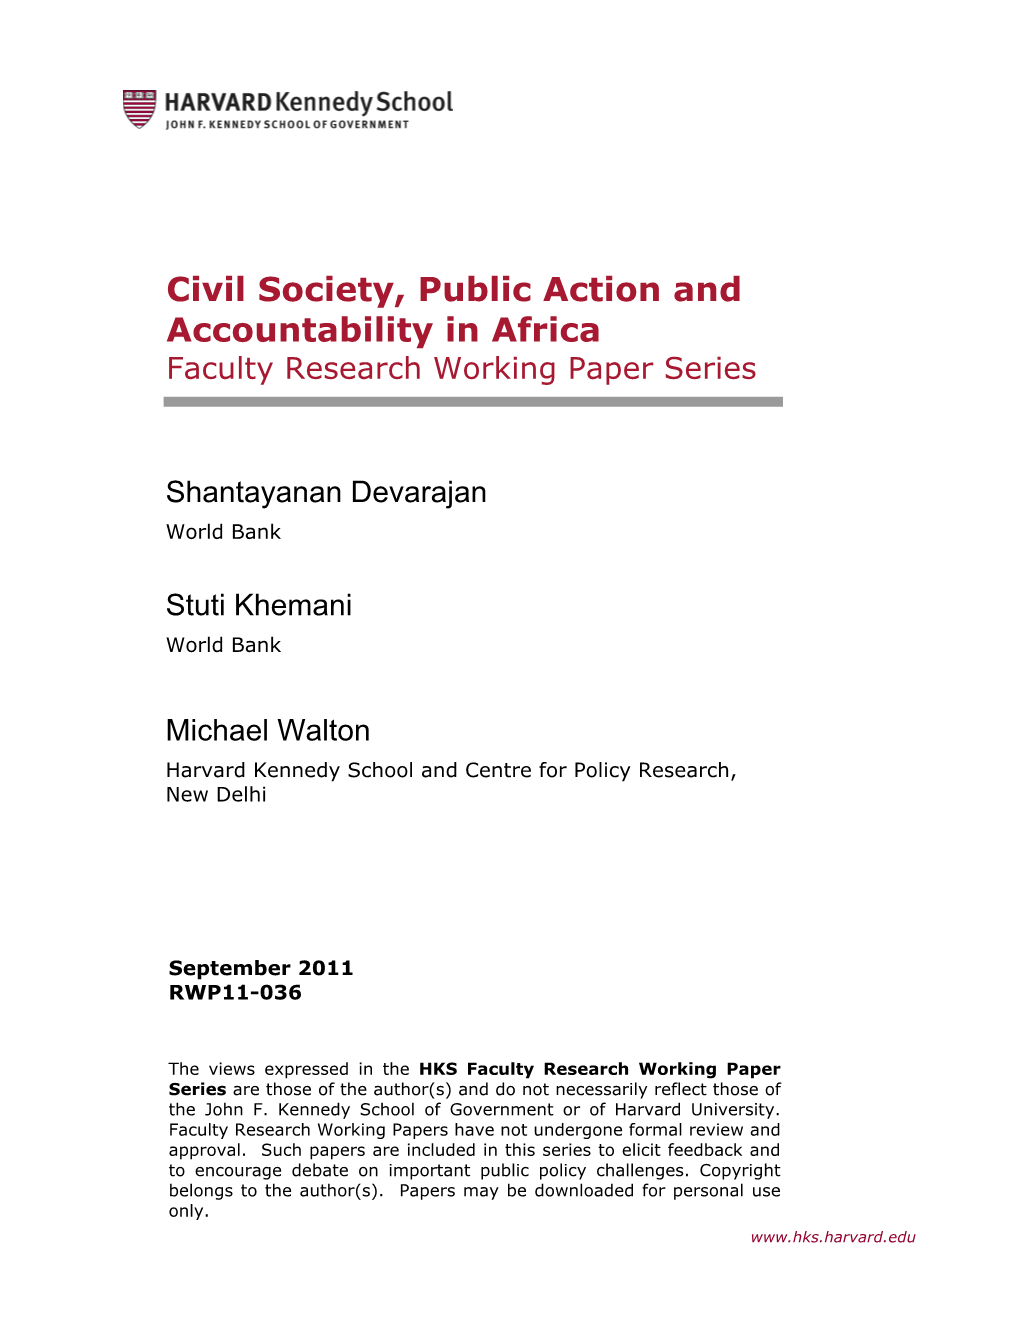 Civil Society, Public Action and Accountability in Africa Faculty Research Working Paper Series